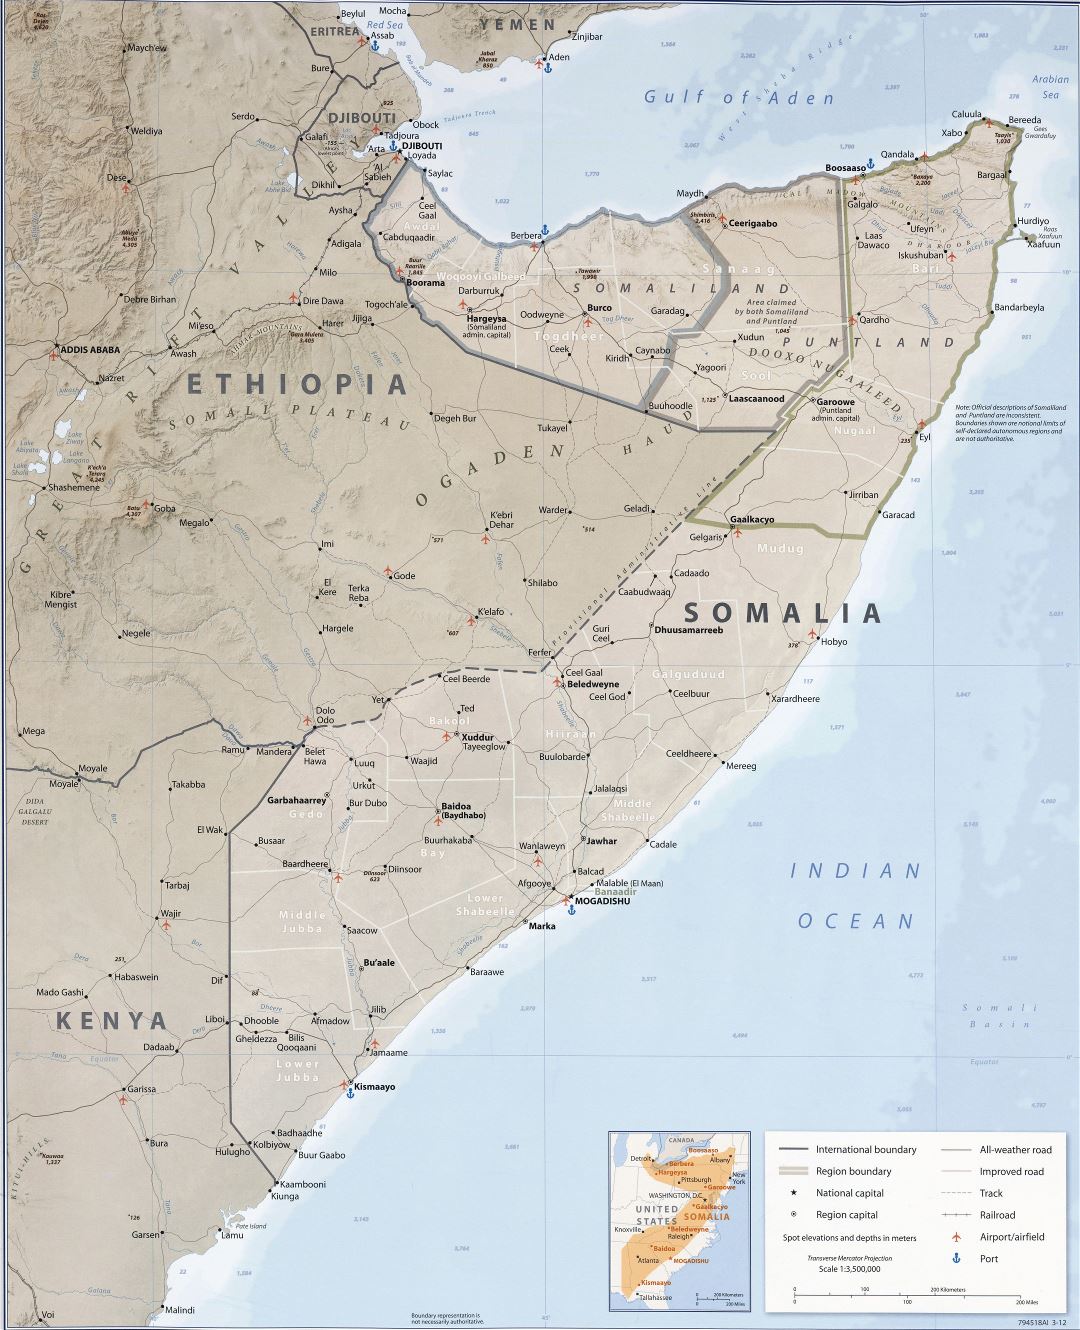 Large Detailed Political And Administrative Map Of Somalia With Relief